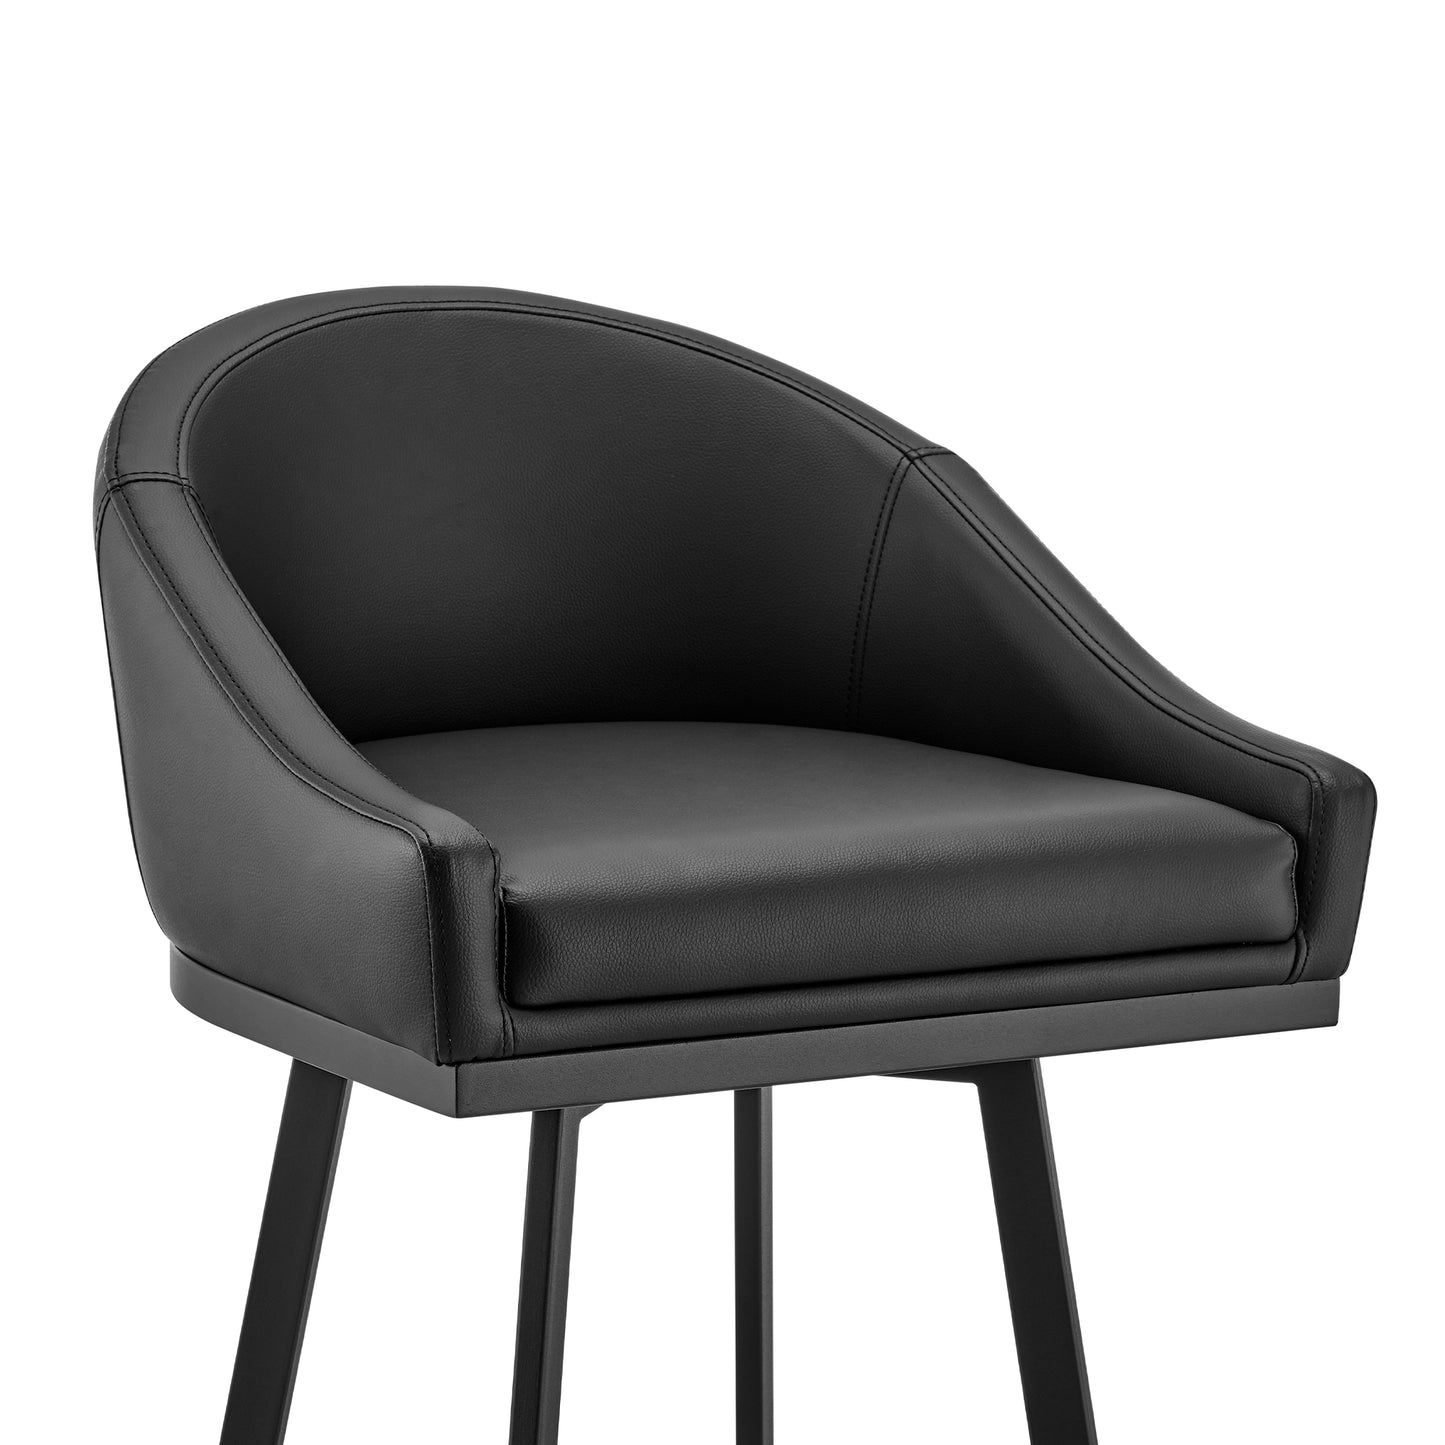 Noran Swivel Counter Stool in Black Metal with Black Faux Leather